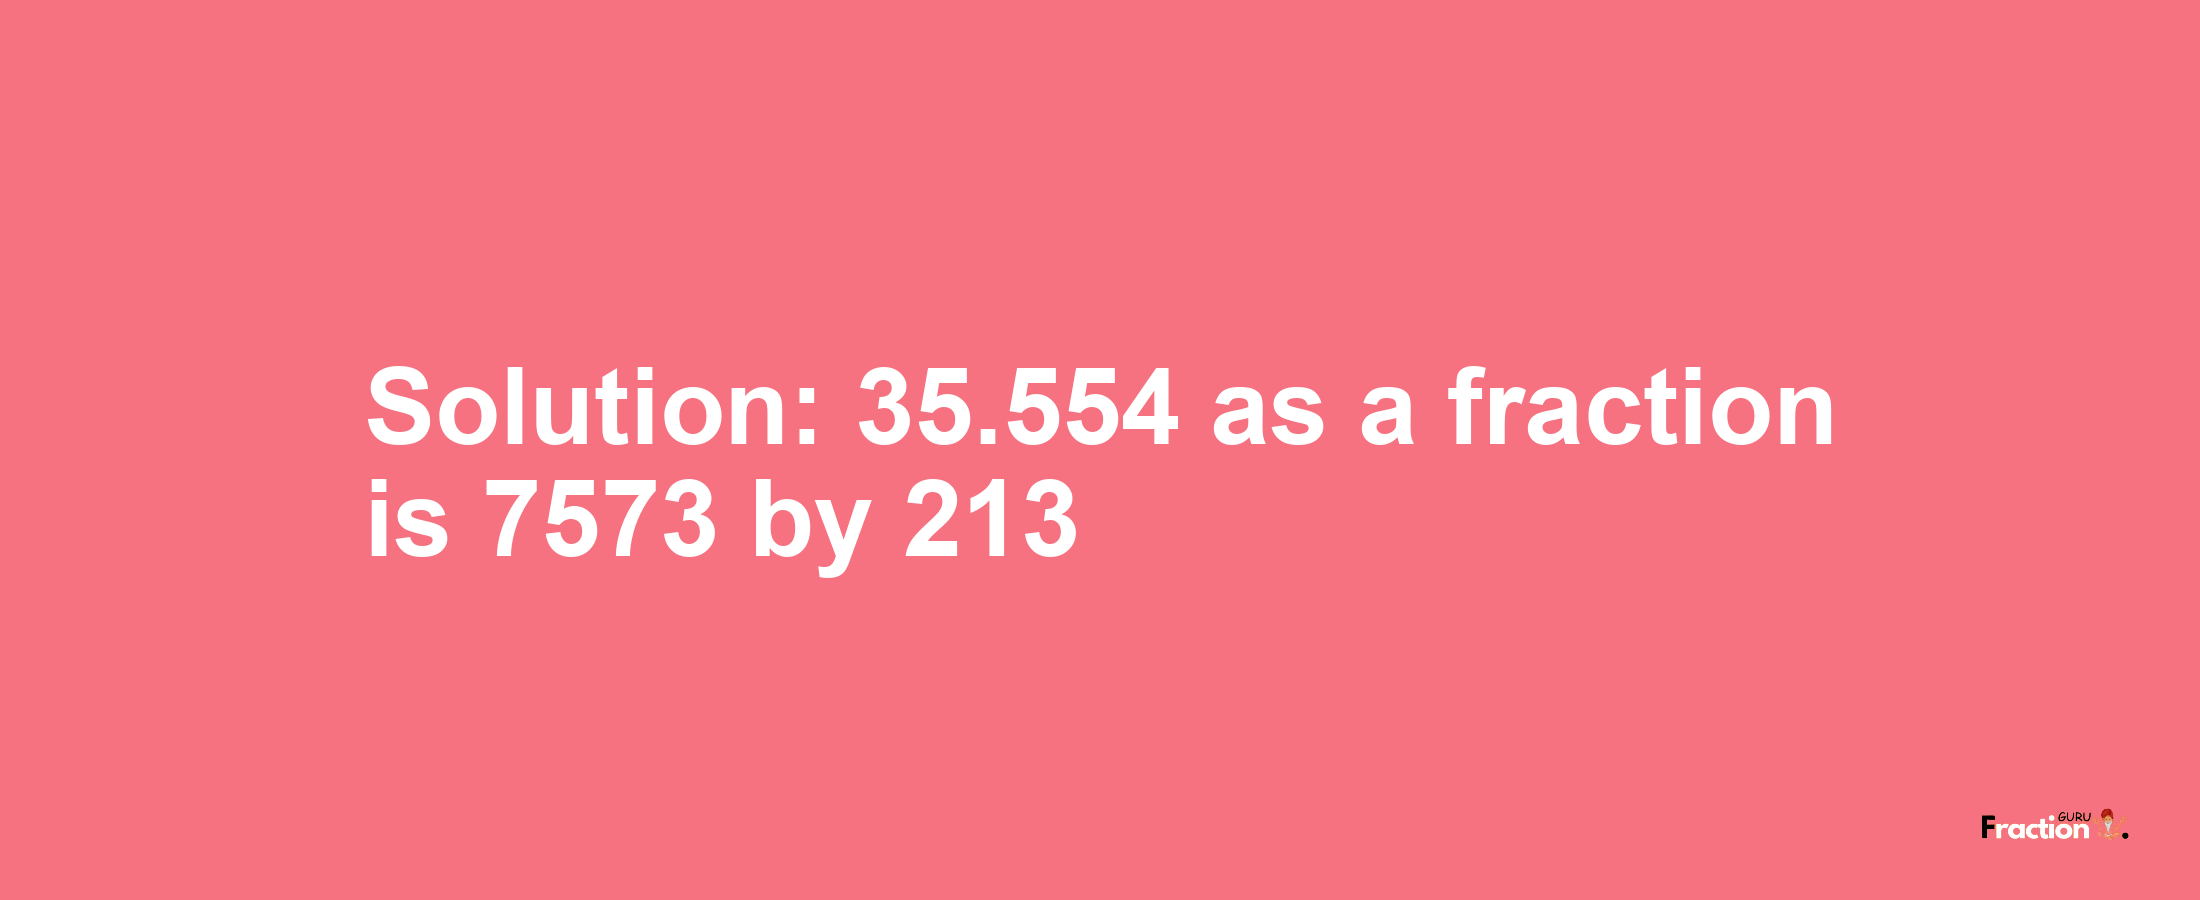 Solution:35.554 as a fraction is 7573/213